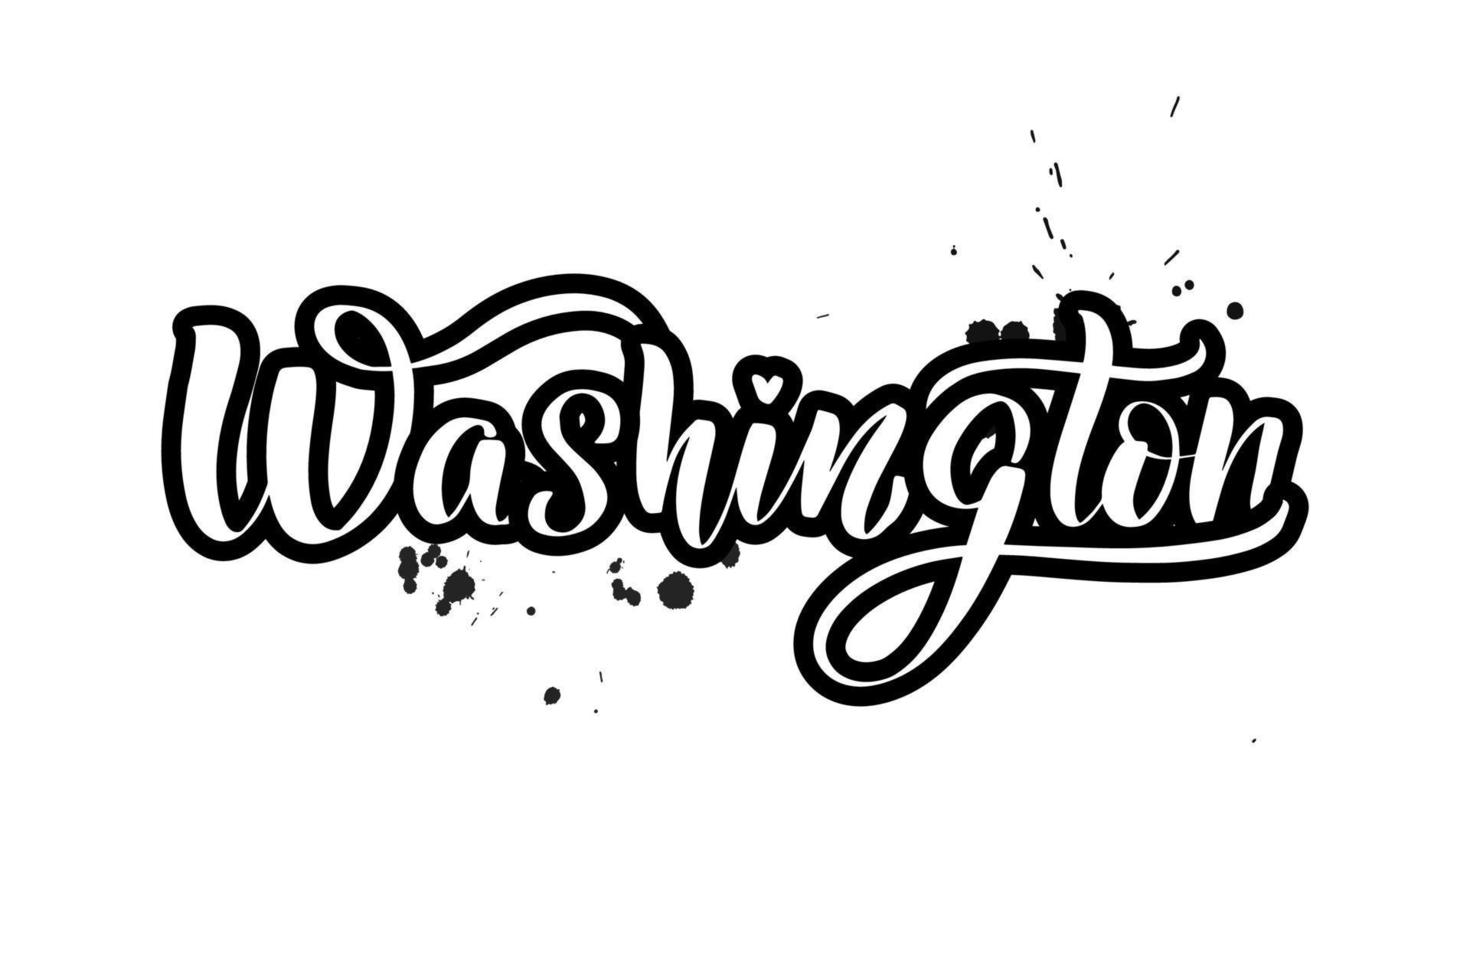 Inspirational handwritten brush lettering Washington. Vector calligraphy illustration isolated on white background. Typography for banners, badges, postcard, tshirt, prints, posters.